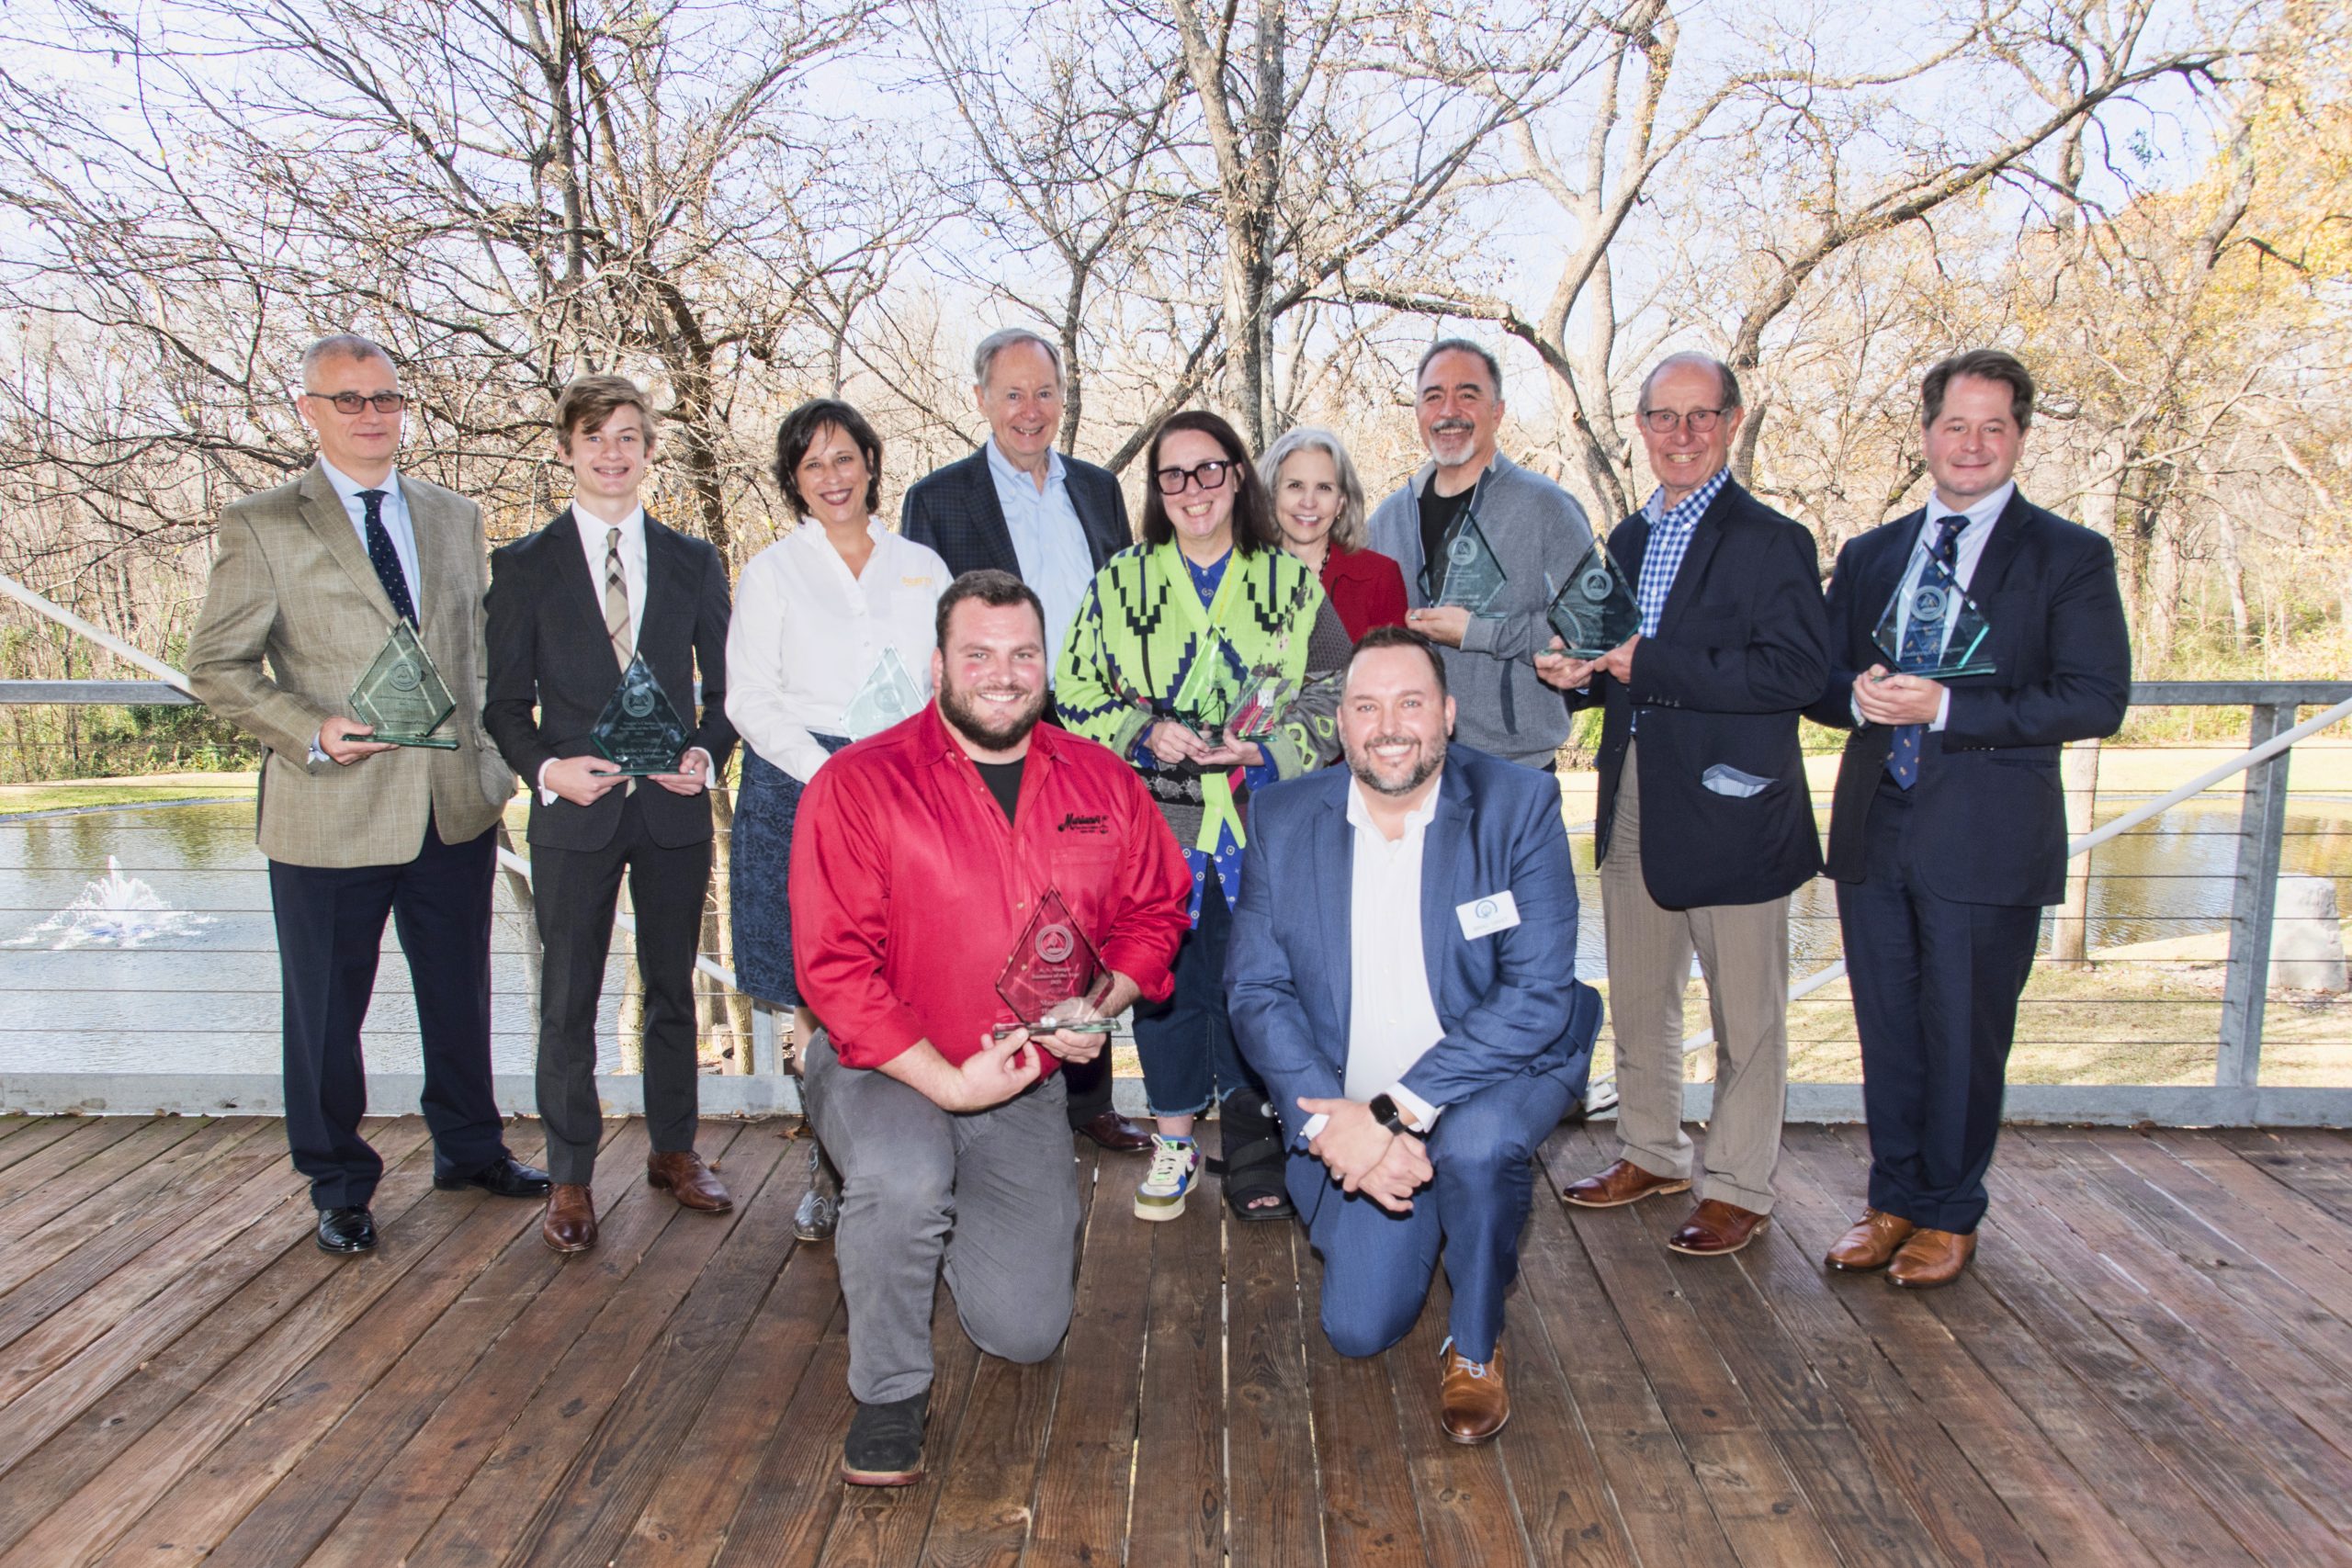 Recipients of the Business of the Year Awards pose in front of a pond.